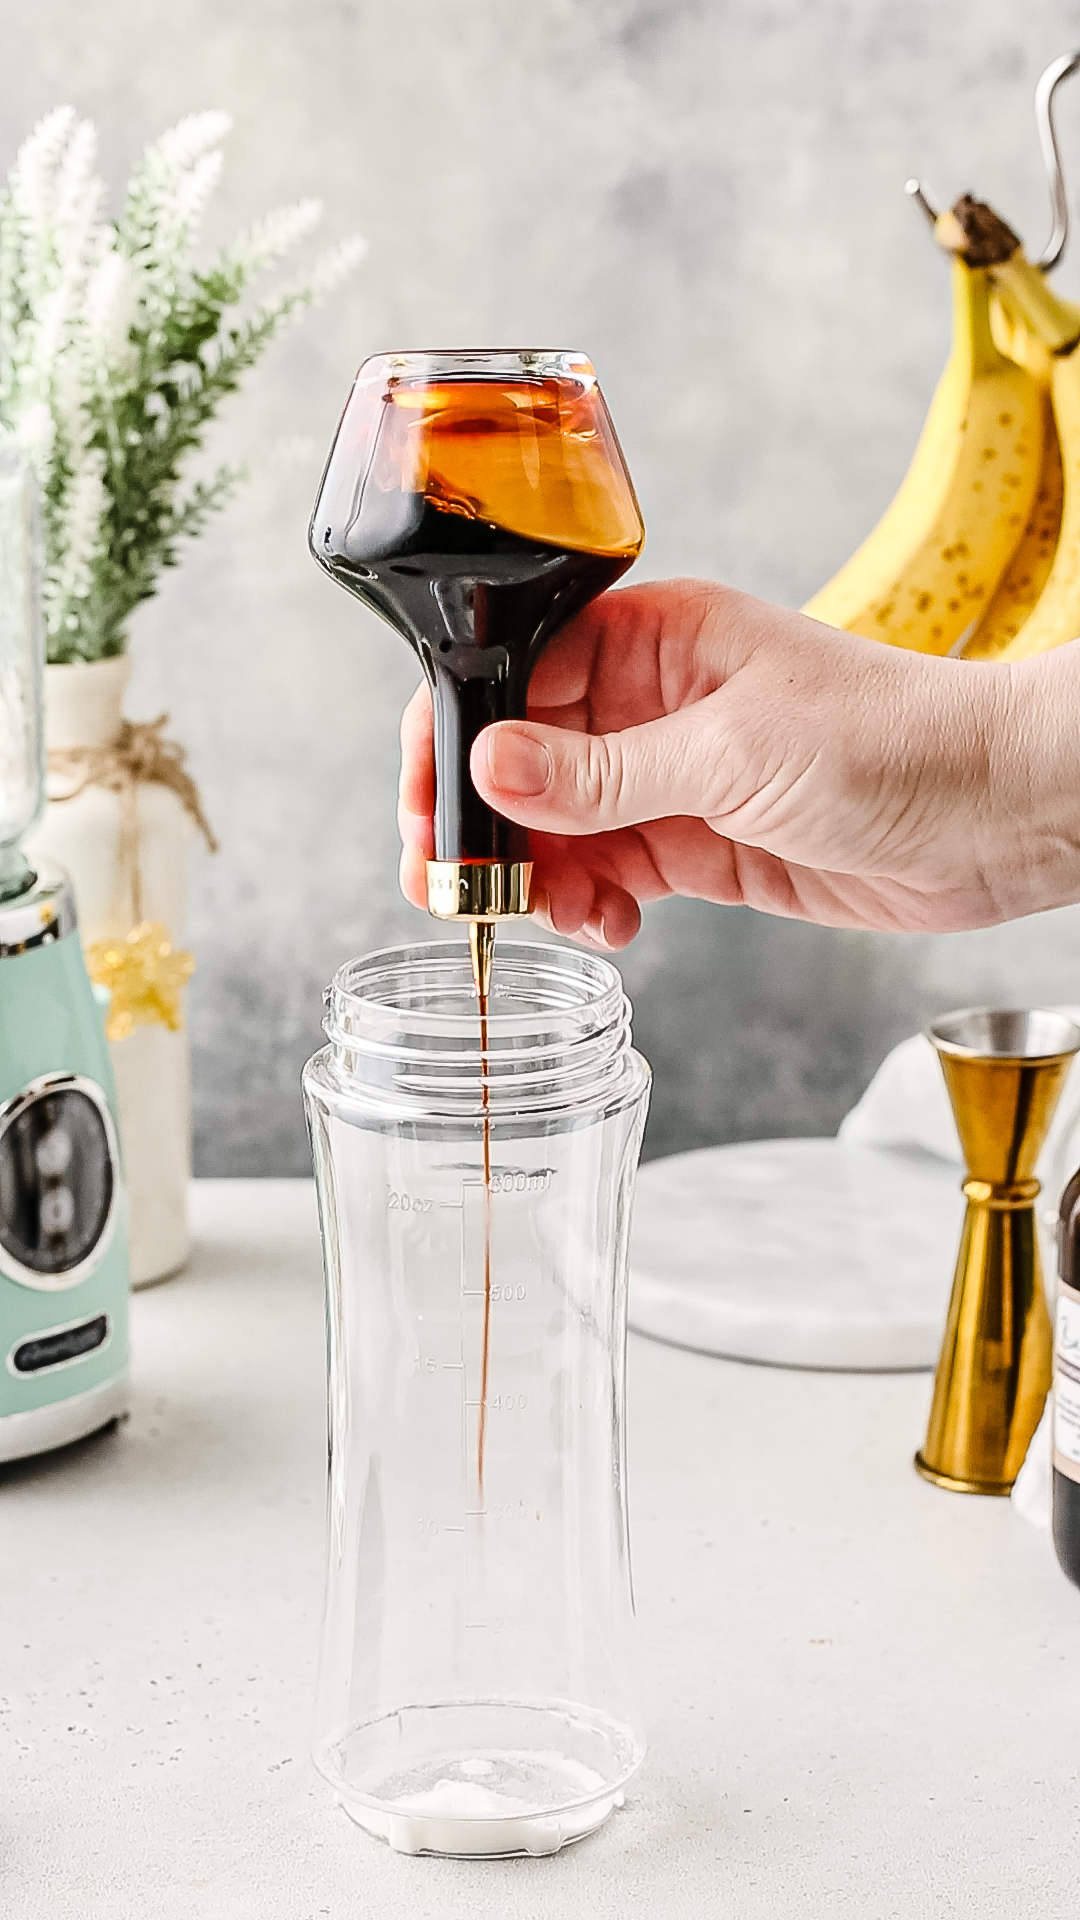 Adding a dash of bitters to a blender cup.